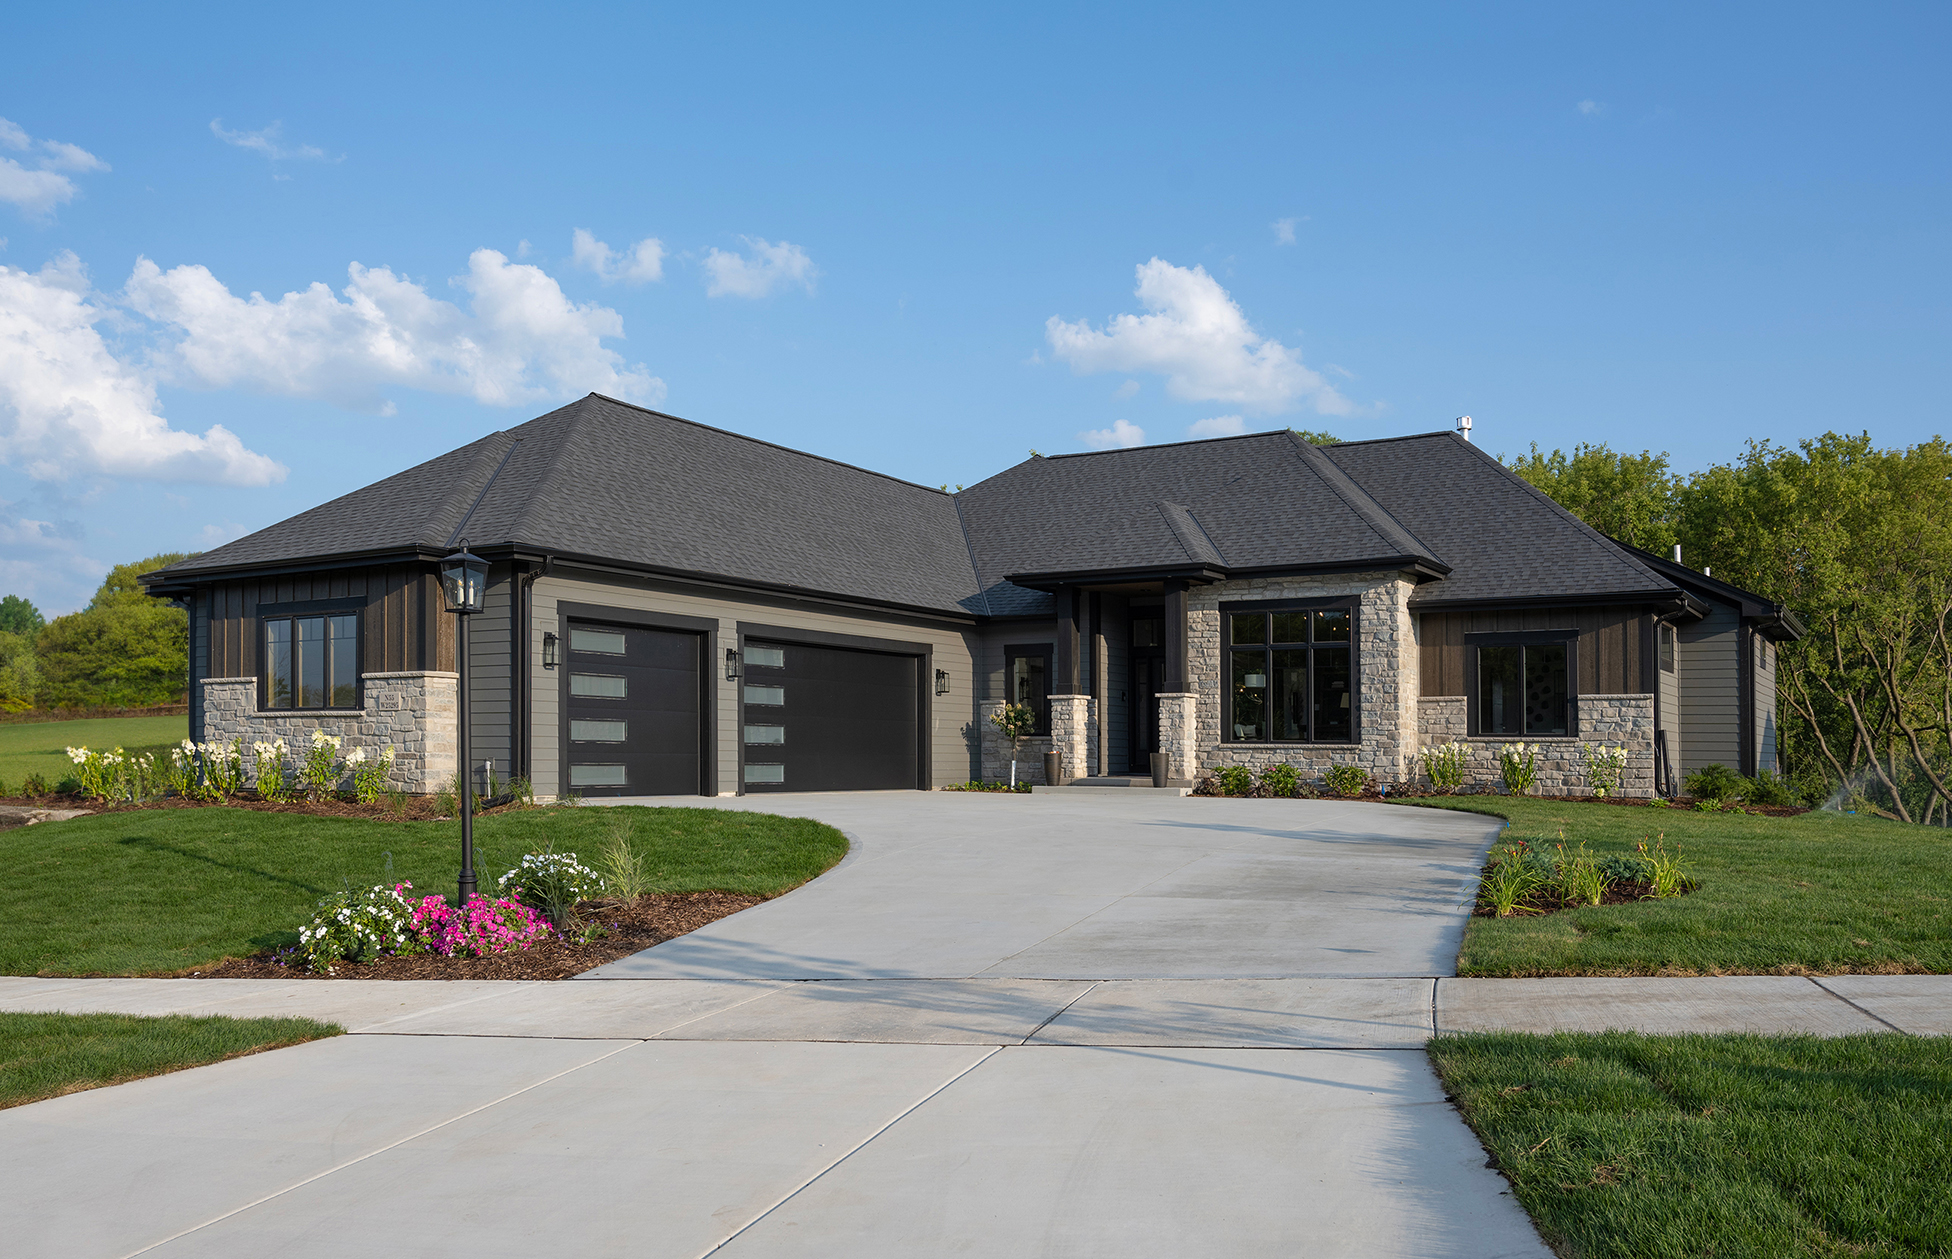 Spruce at Redford Hills Exterior - Espire Overview